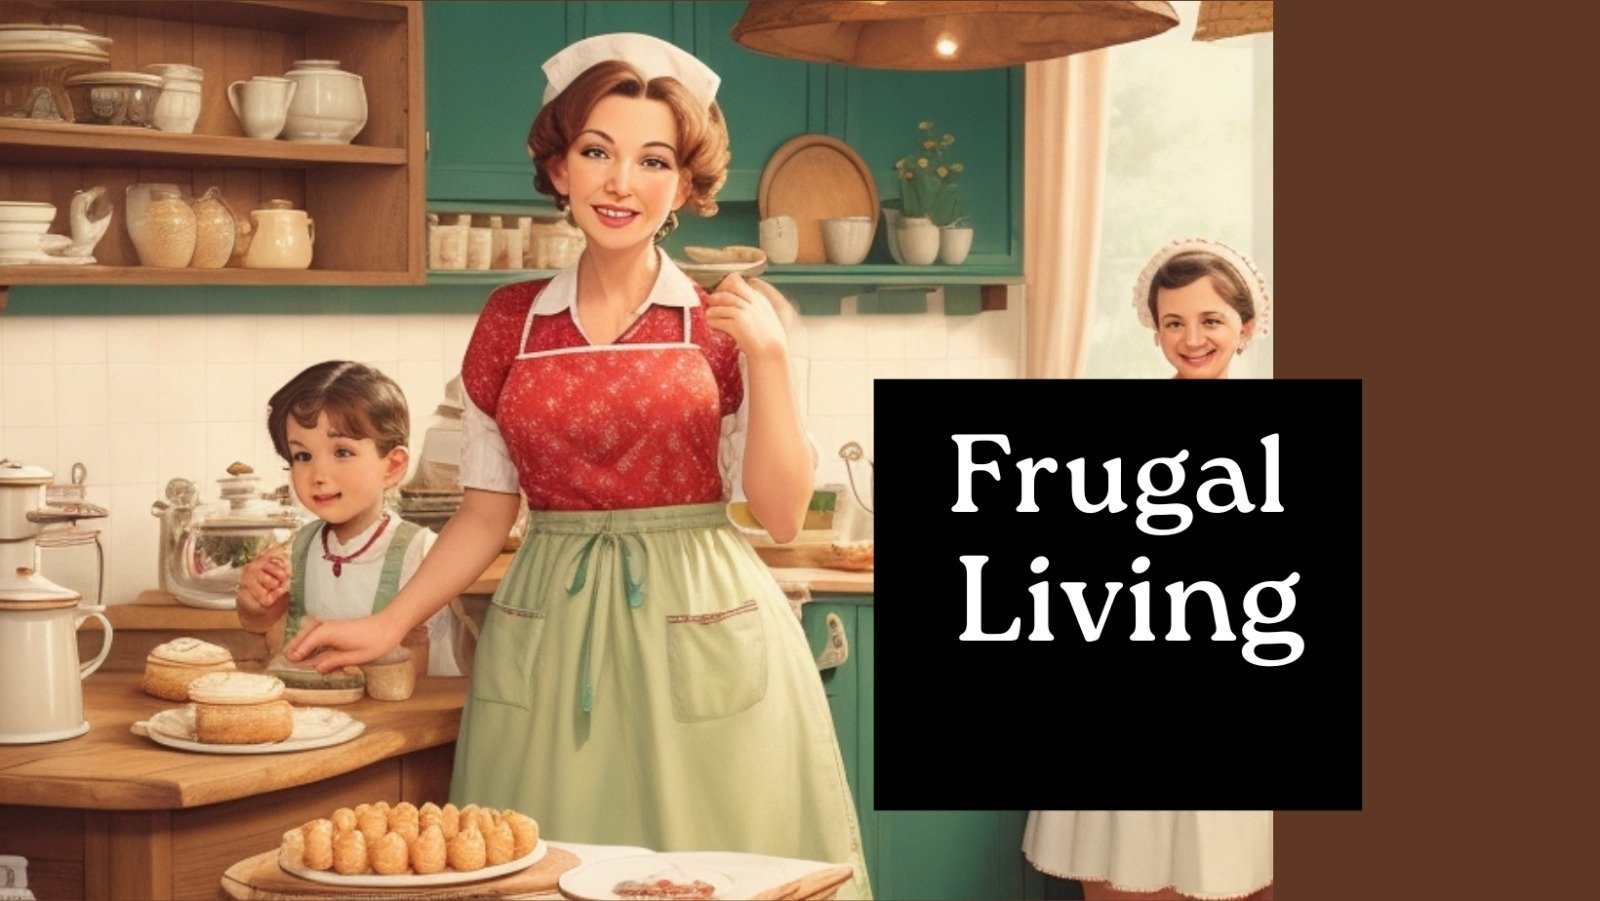 What is Frugal Living?